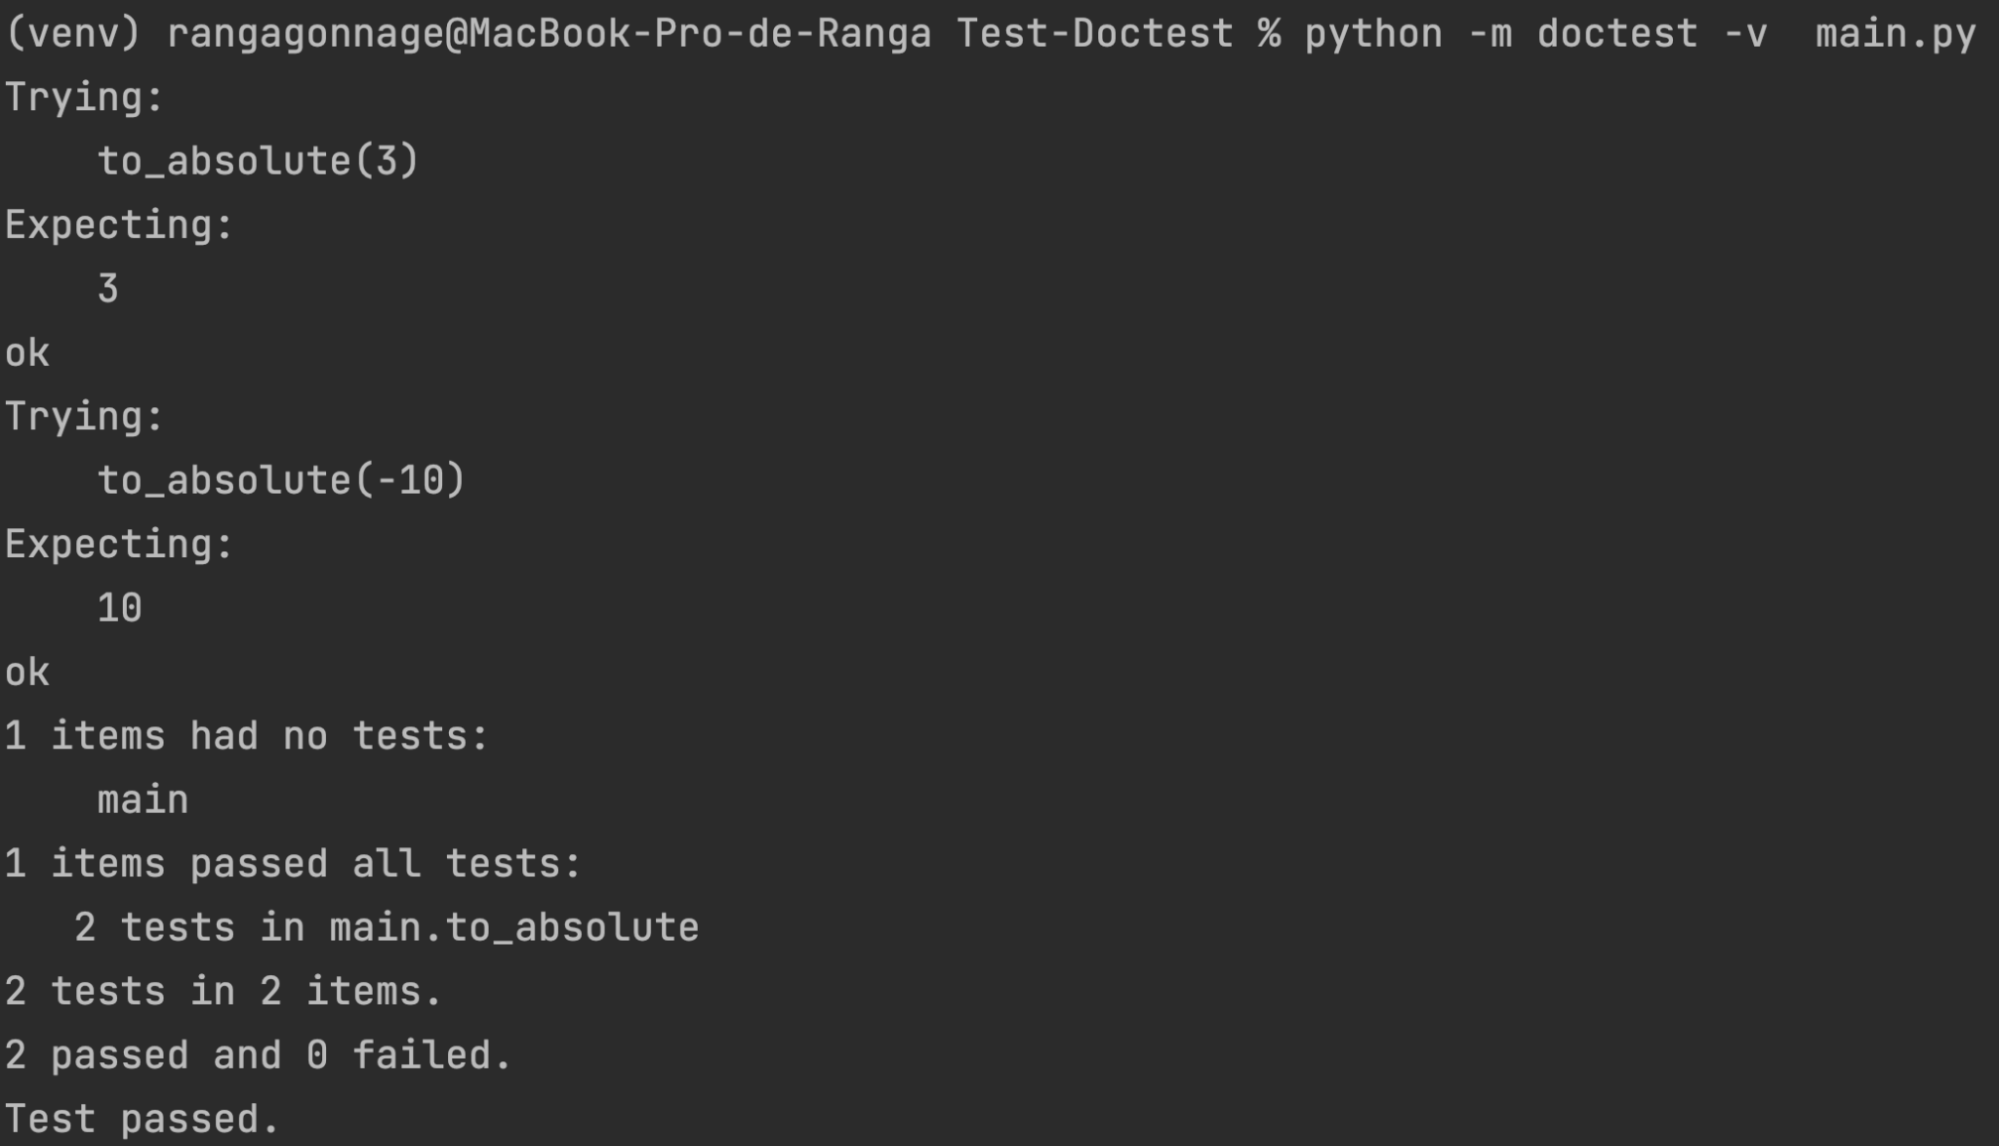 Run the doctest by adding -v and the main.py module. This time we have more detail about the doctests.